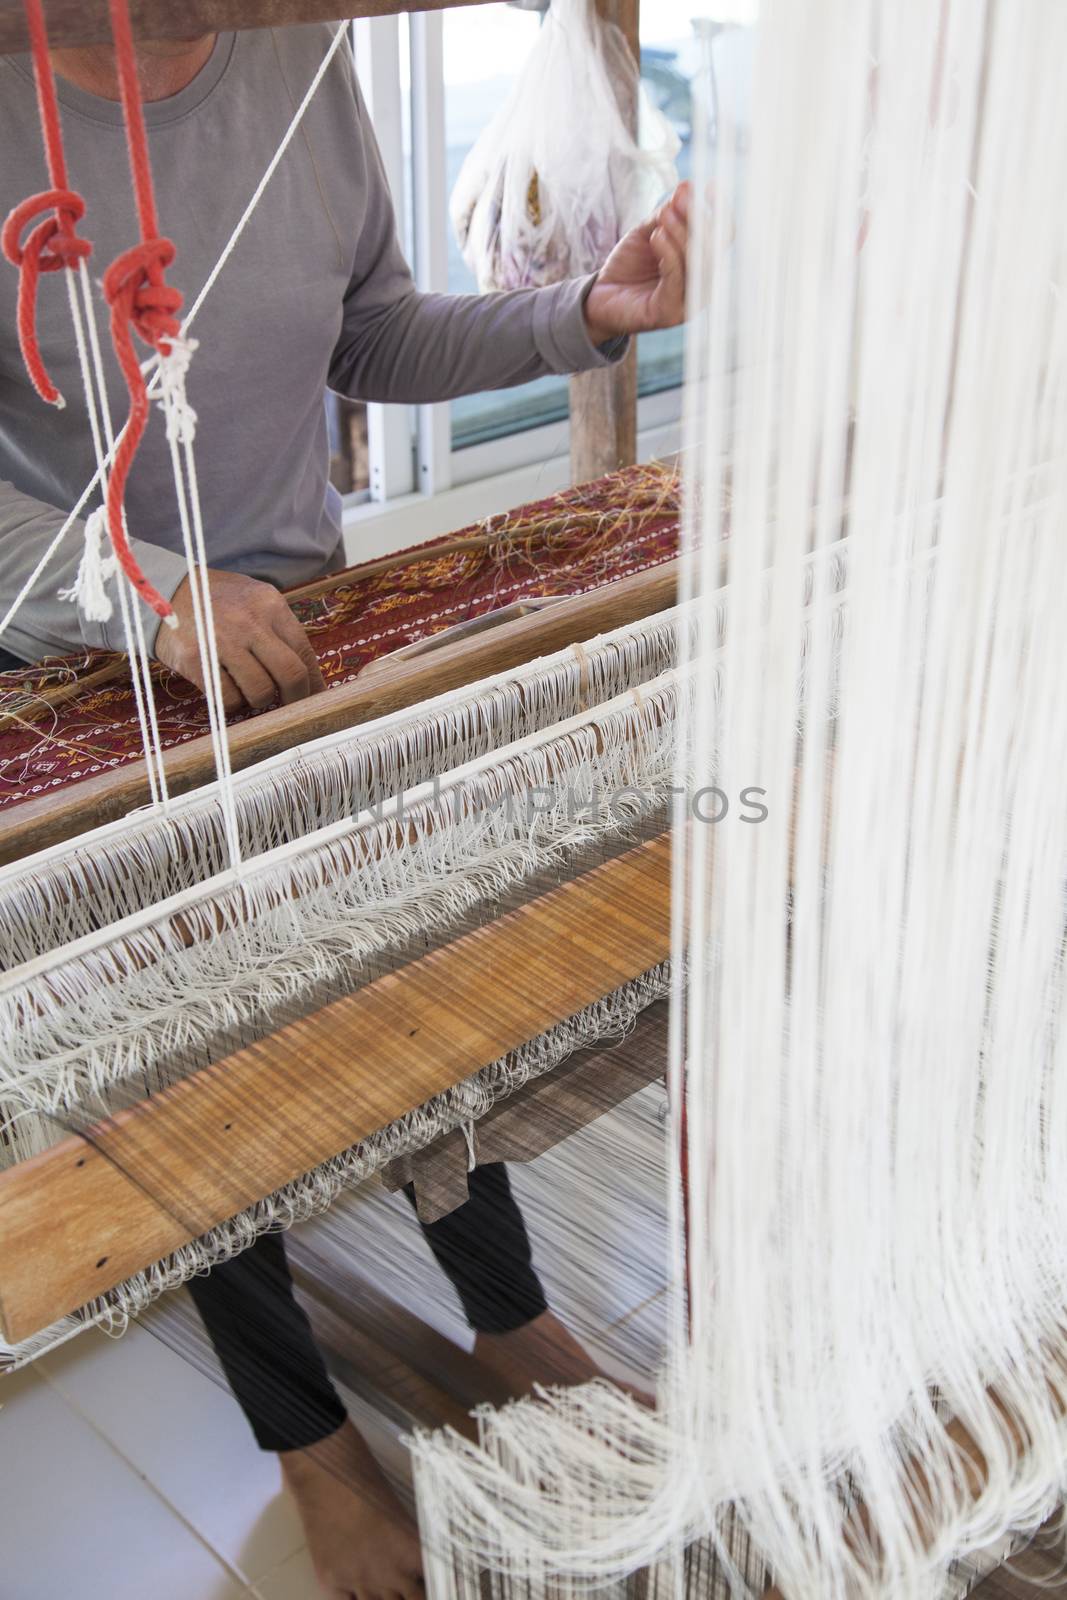 Old asia women demonstrate to procedure of making Thai Silk weaving in small weaving mill